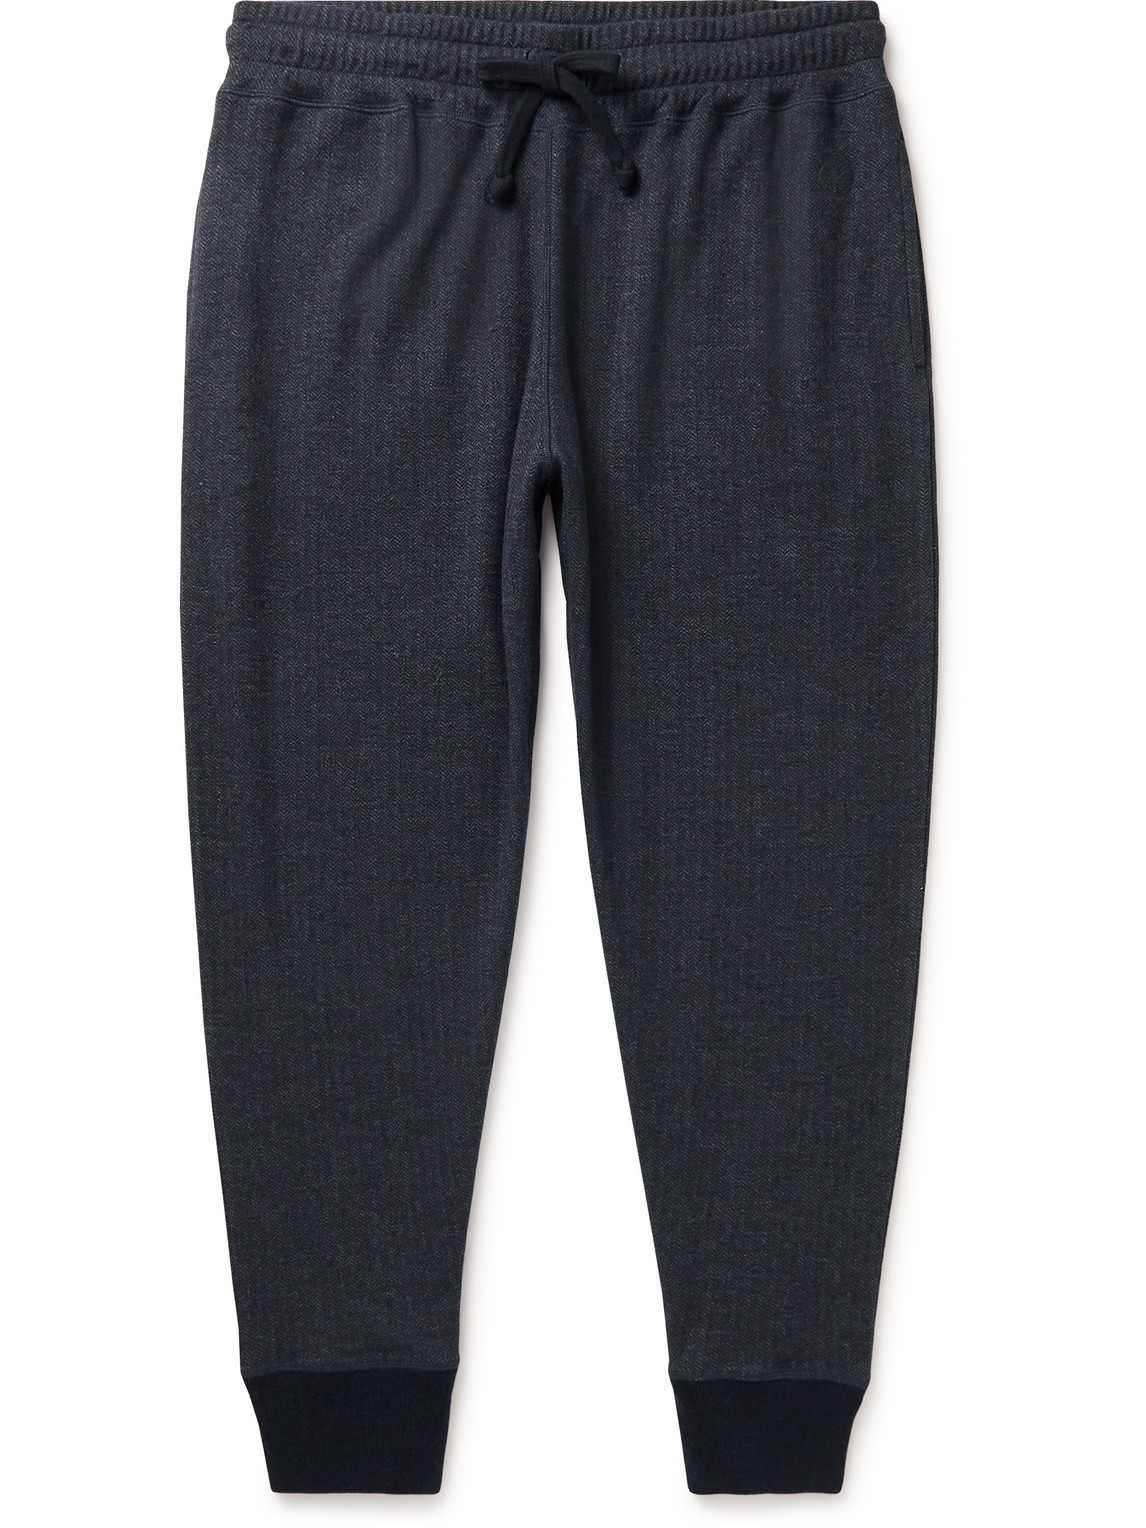 Tapered Herringbone Wool and Cotton-Blend Jersey Sweatpants